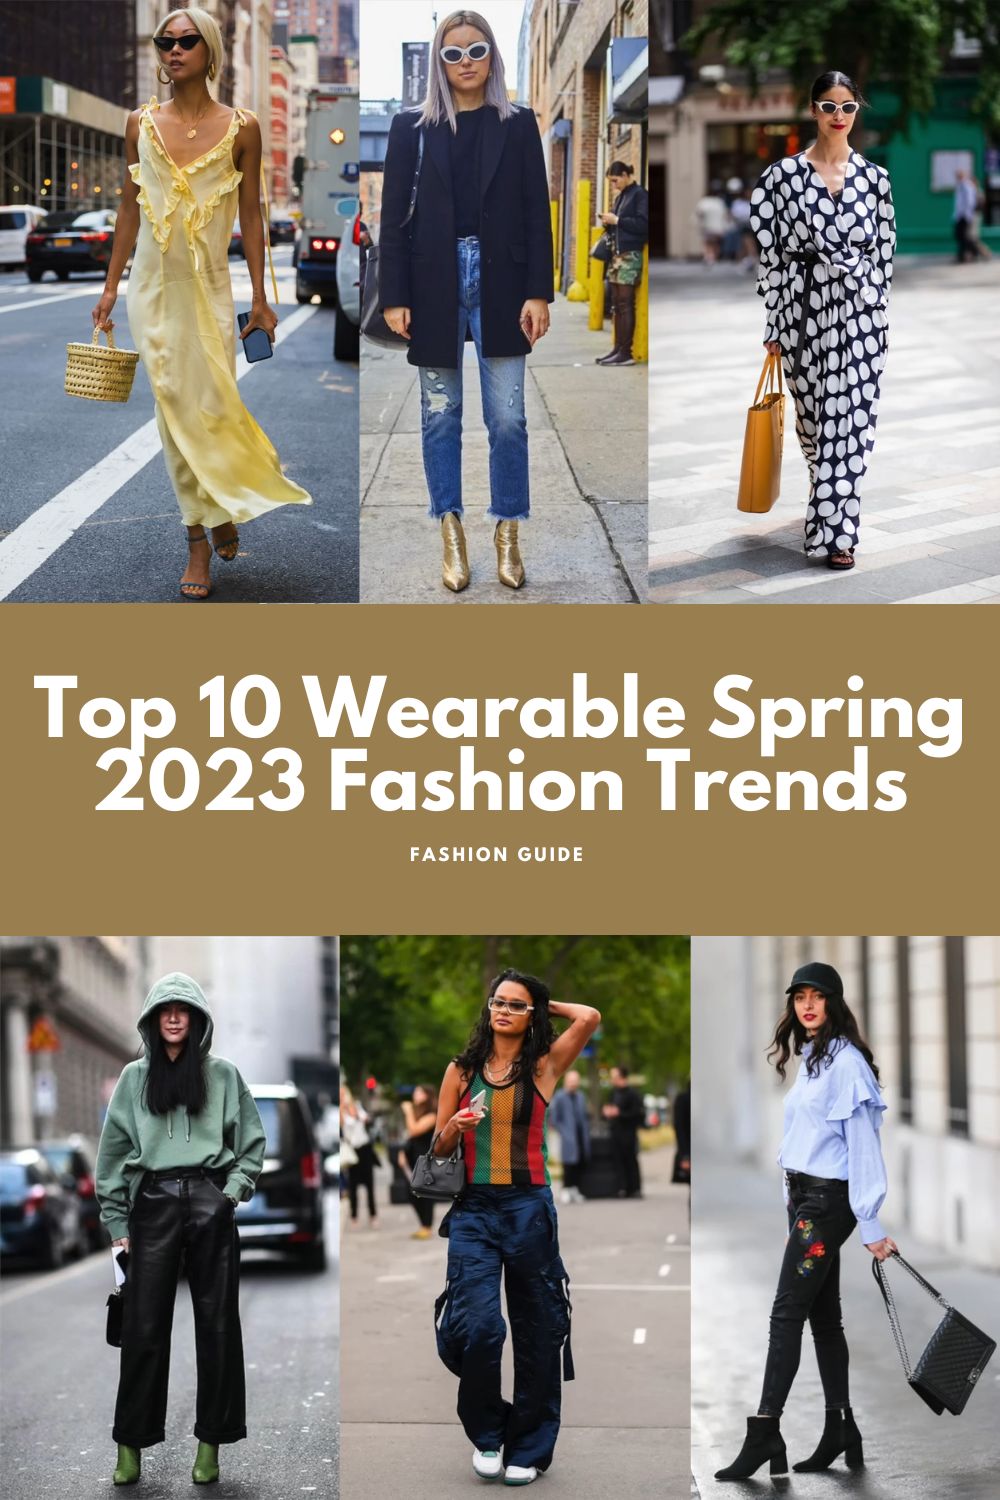 Top 10 Wearable Spring 2023 Fashion Trends